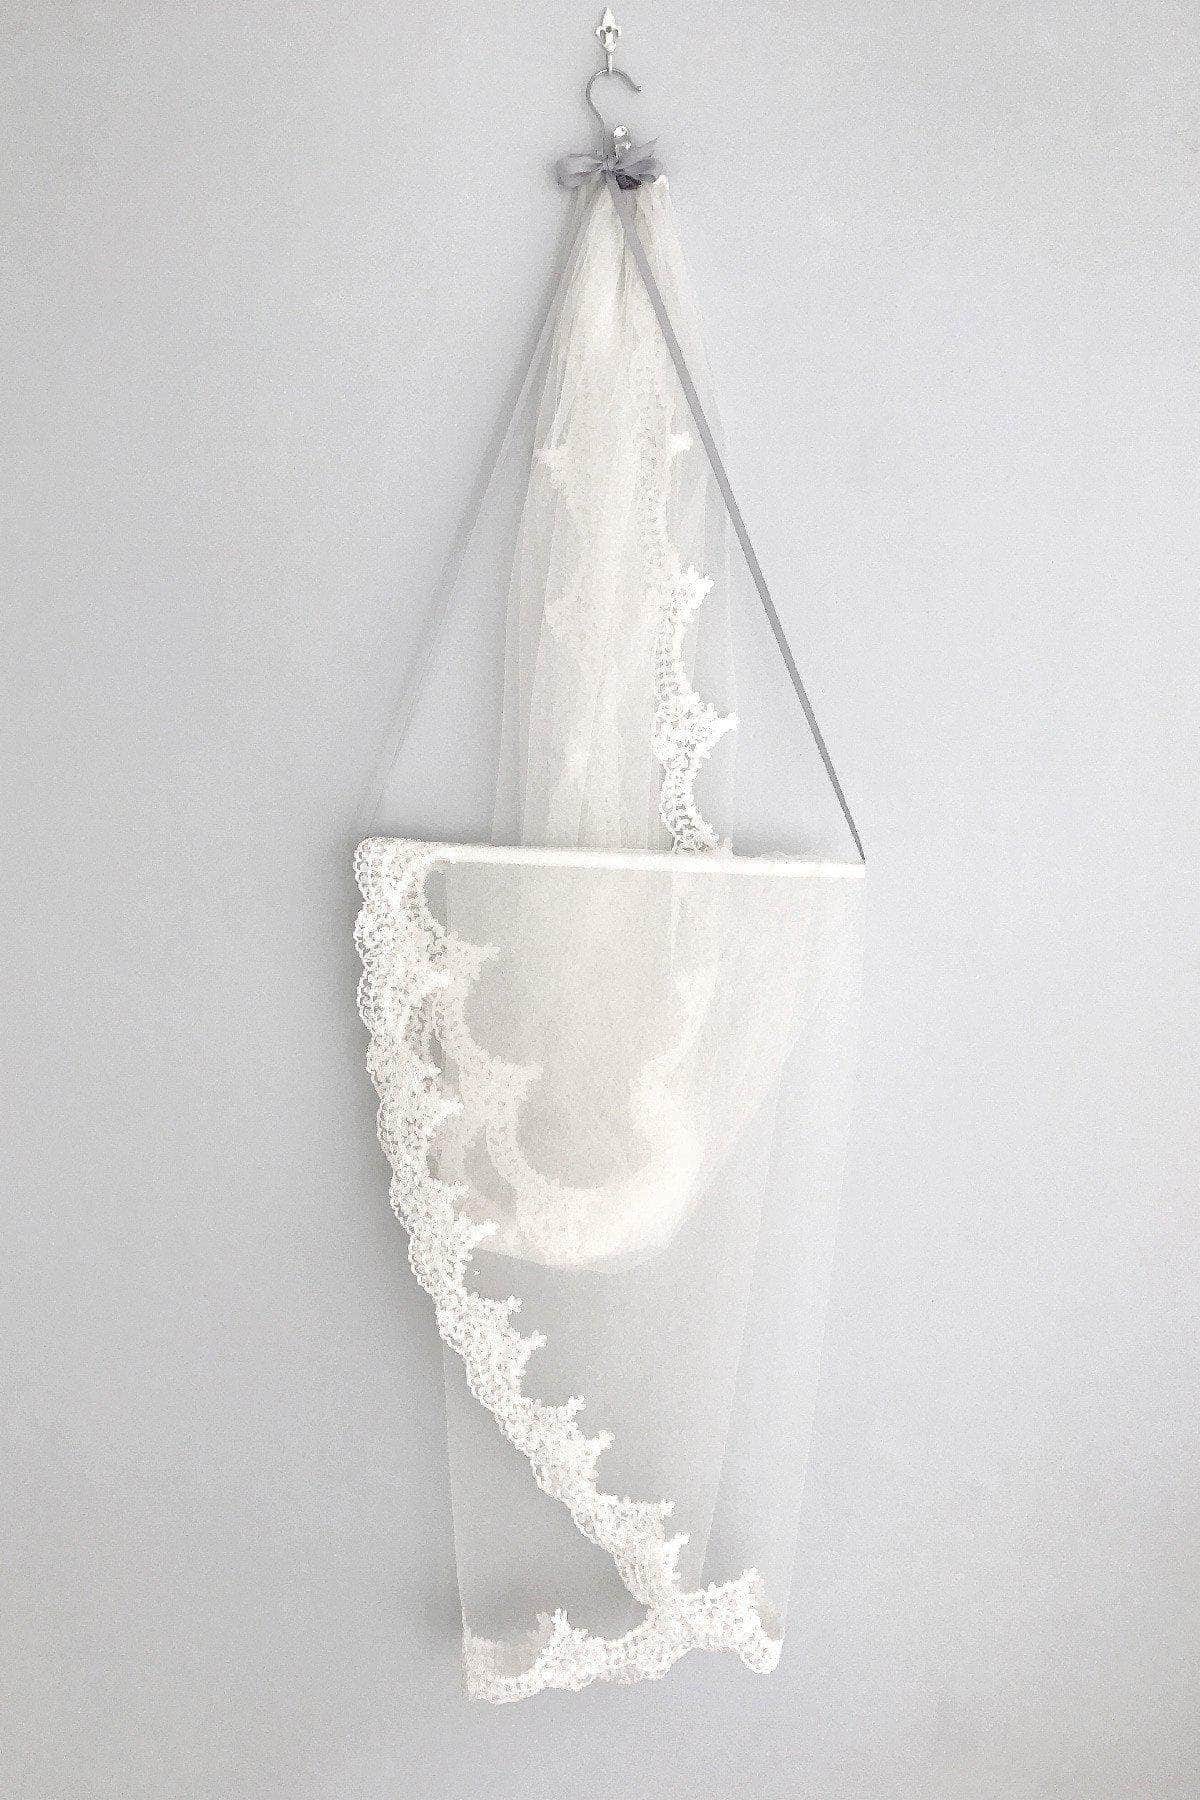 Veil protection Veil hanging hook and hanging attachment for longer veils